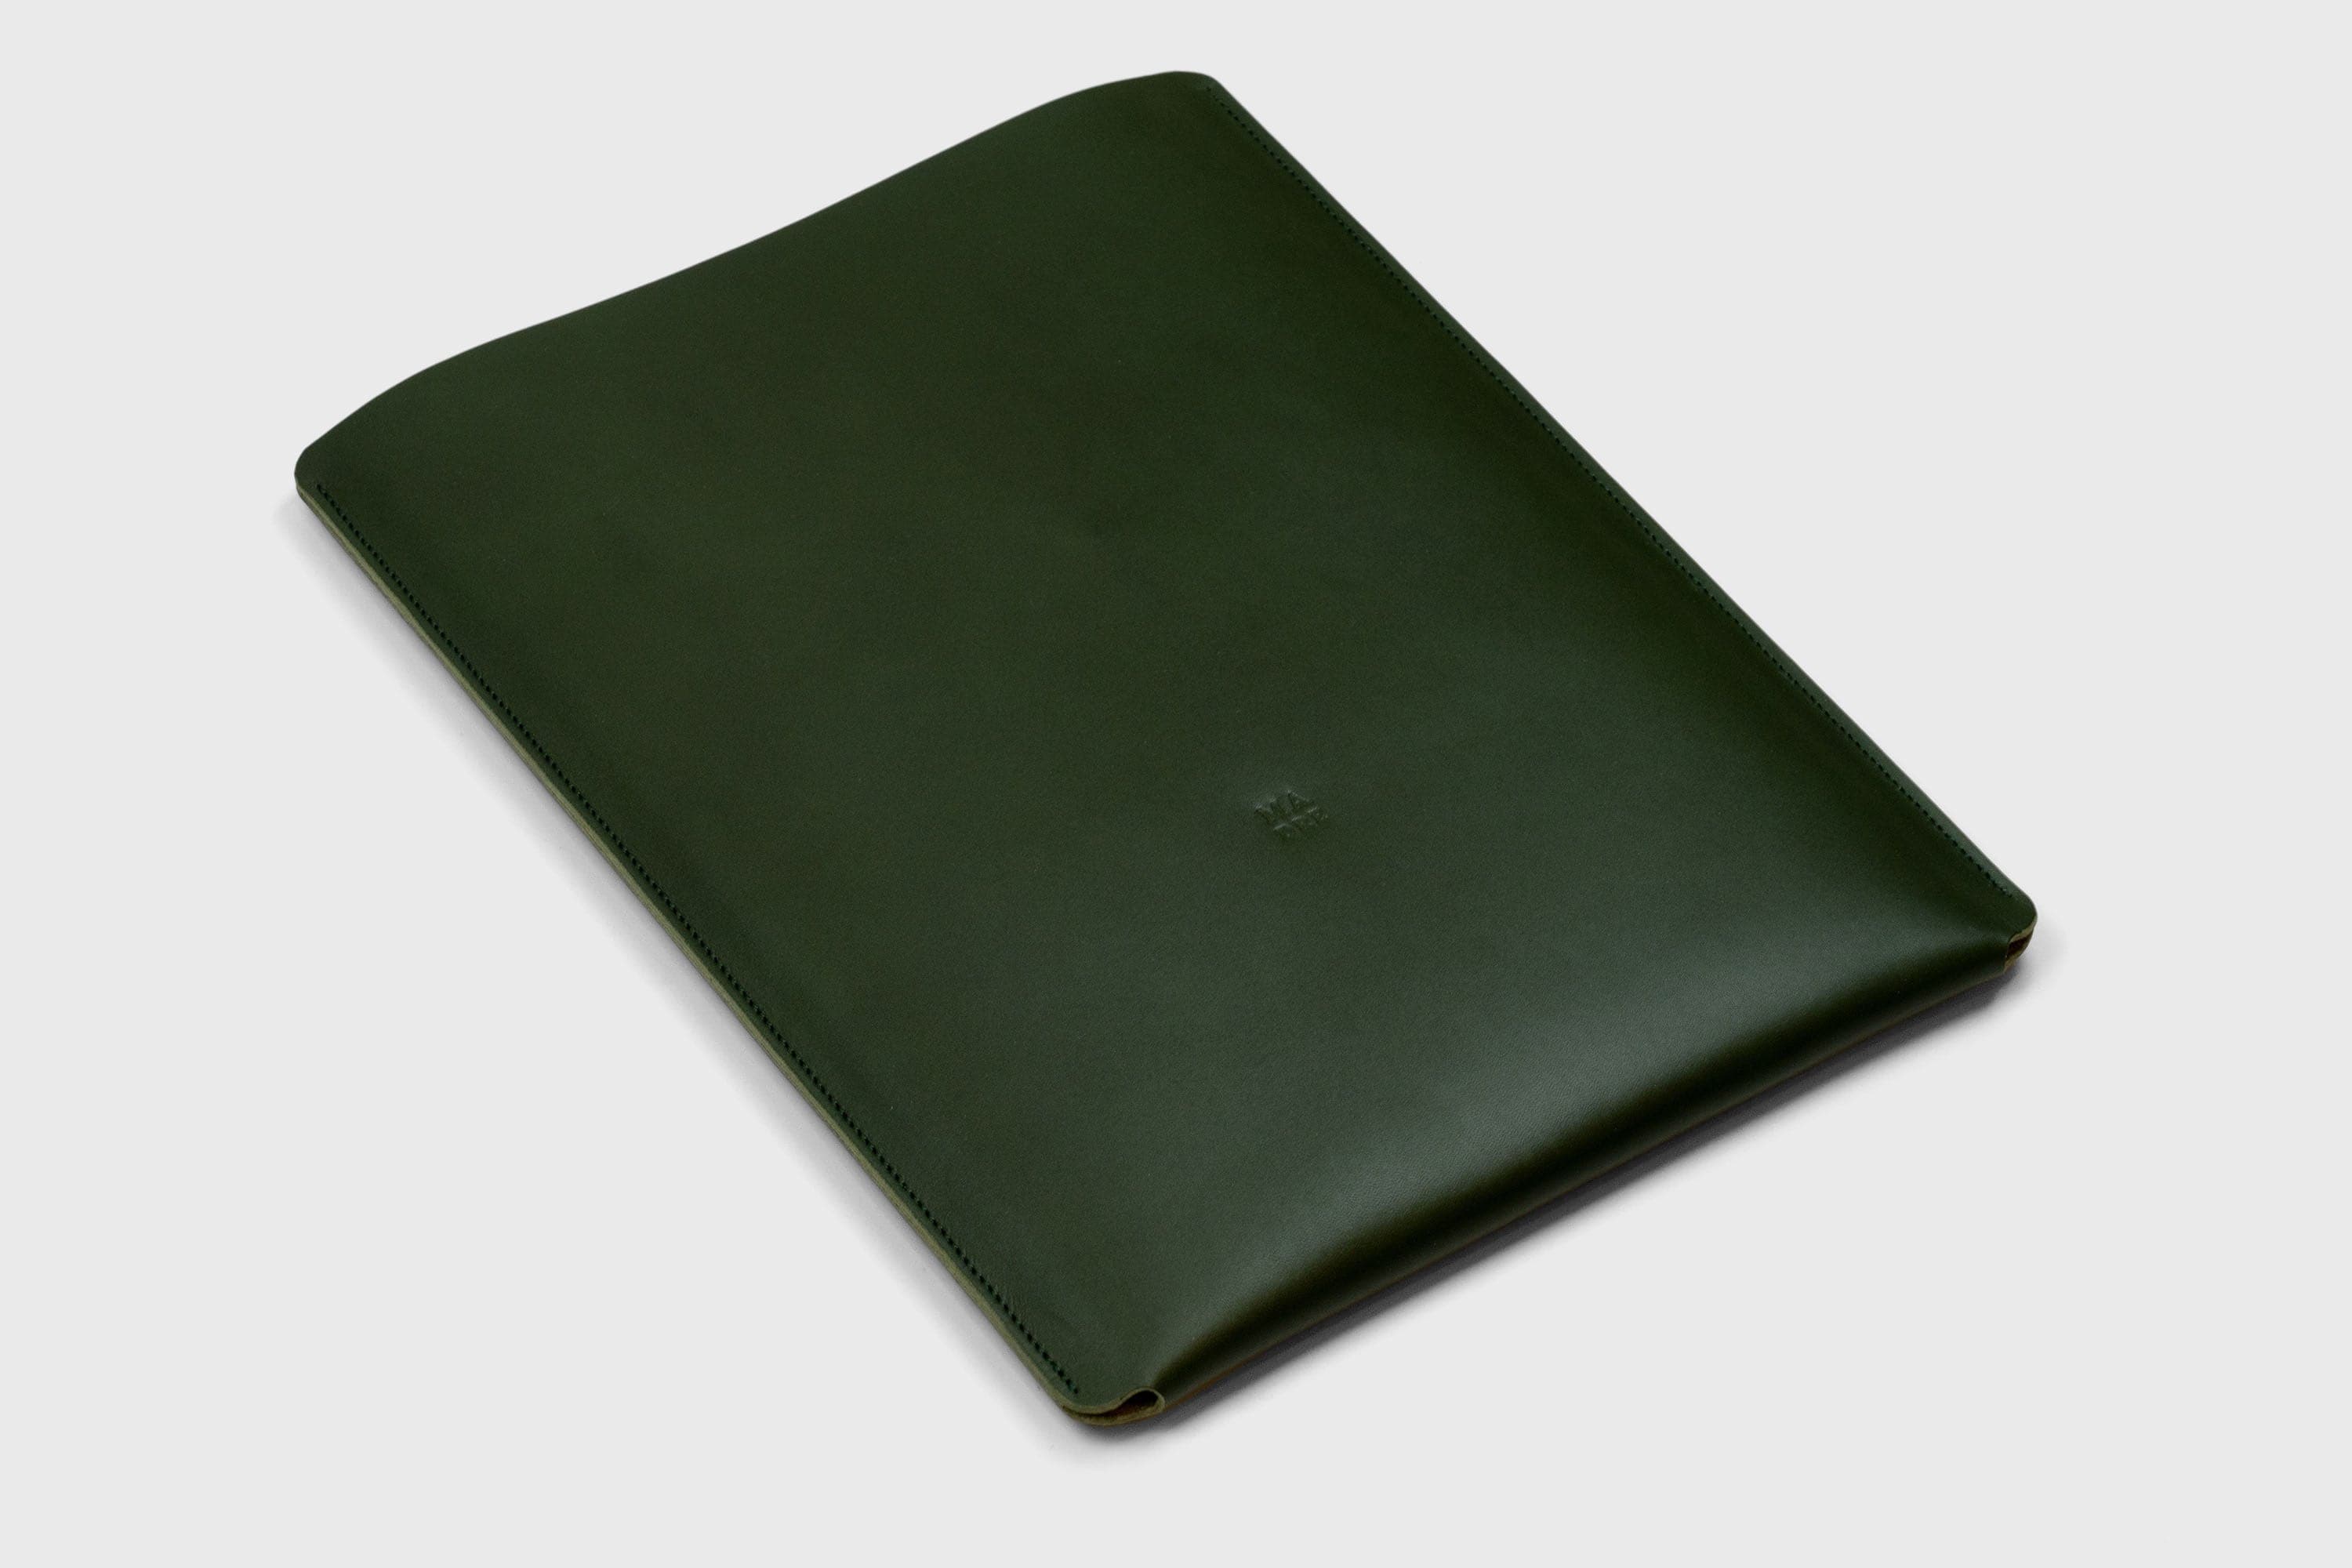 MacBook Sleeve 16 Inch Leather Dark Olive Green Vegetable Tanned Leather Minimalistic Design By Manuel Dreesmann Atelier Madre Barcelona Spain